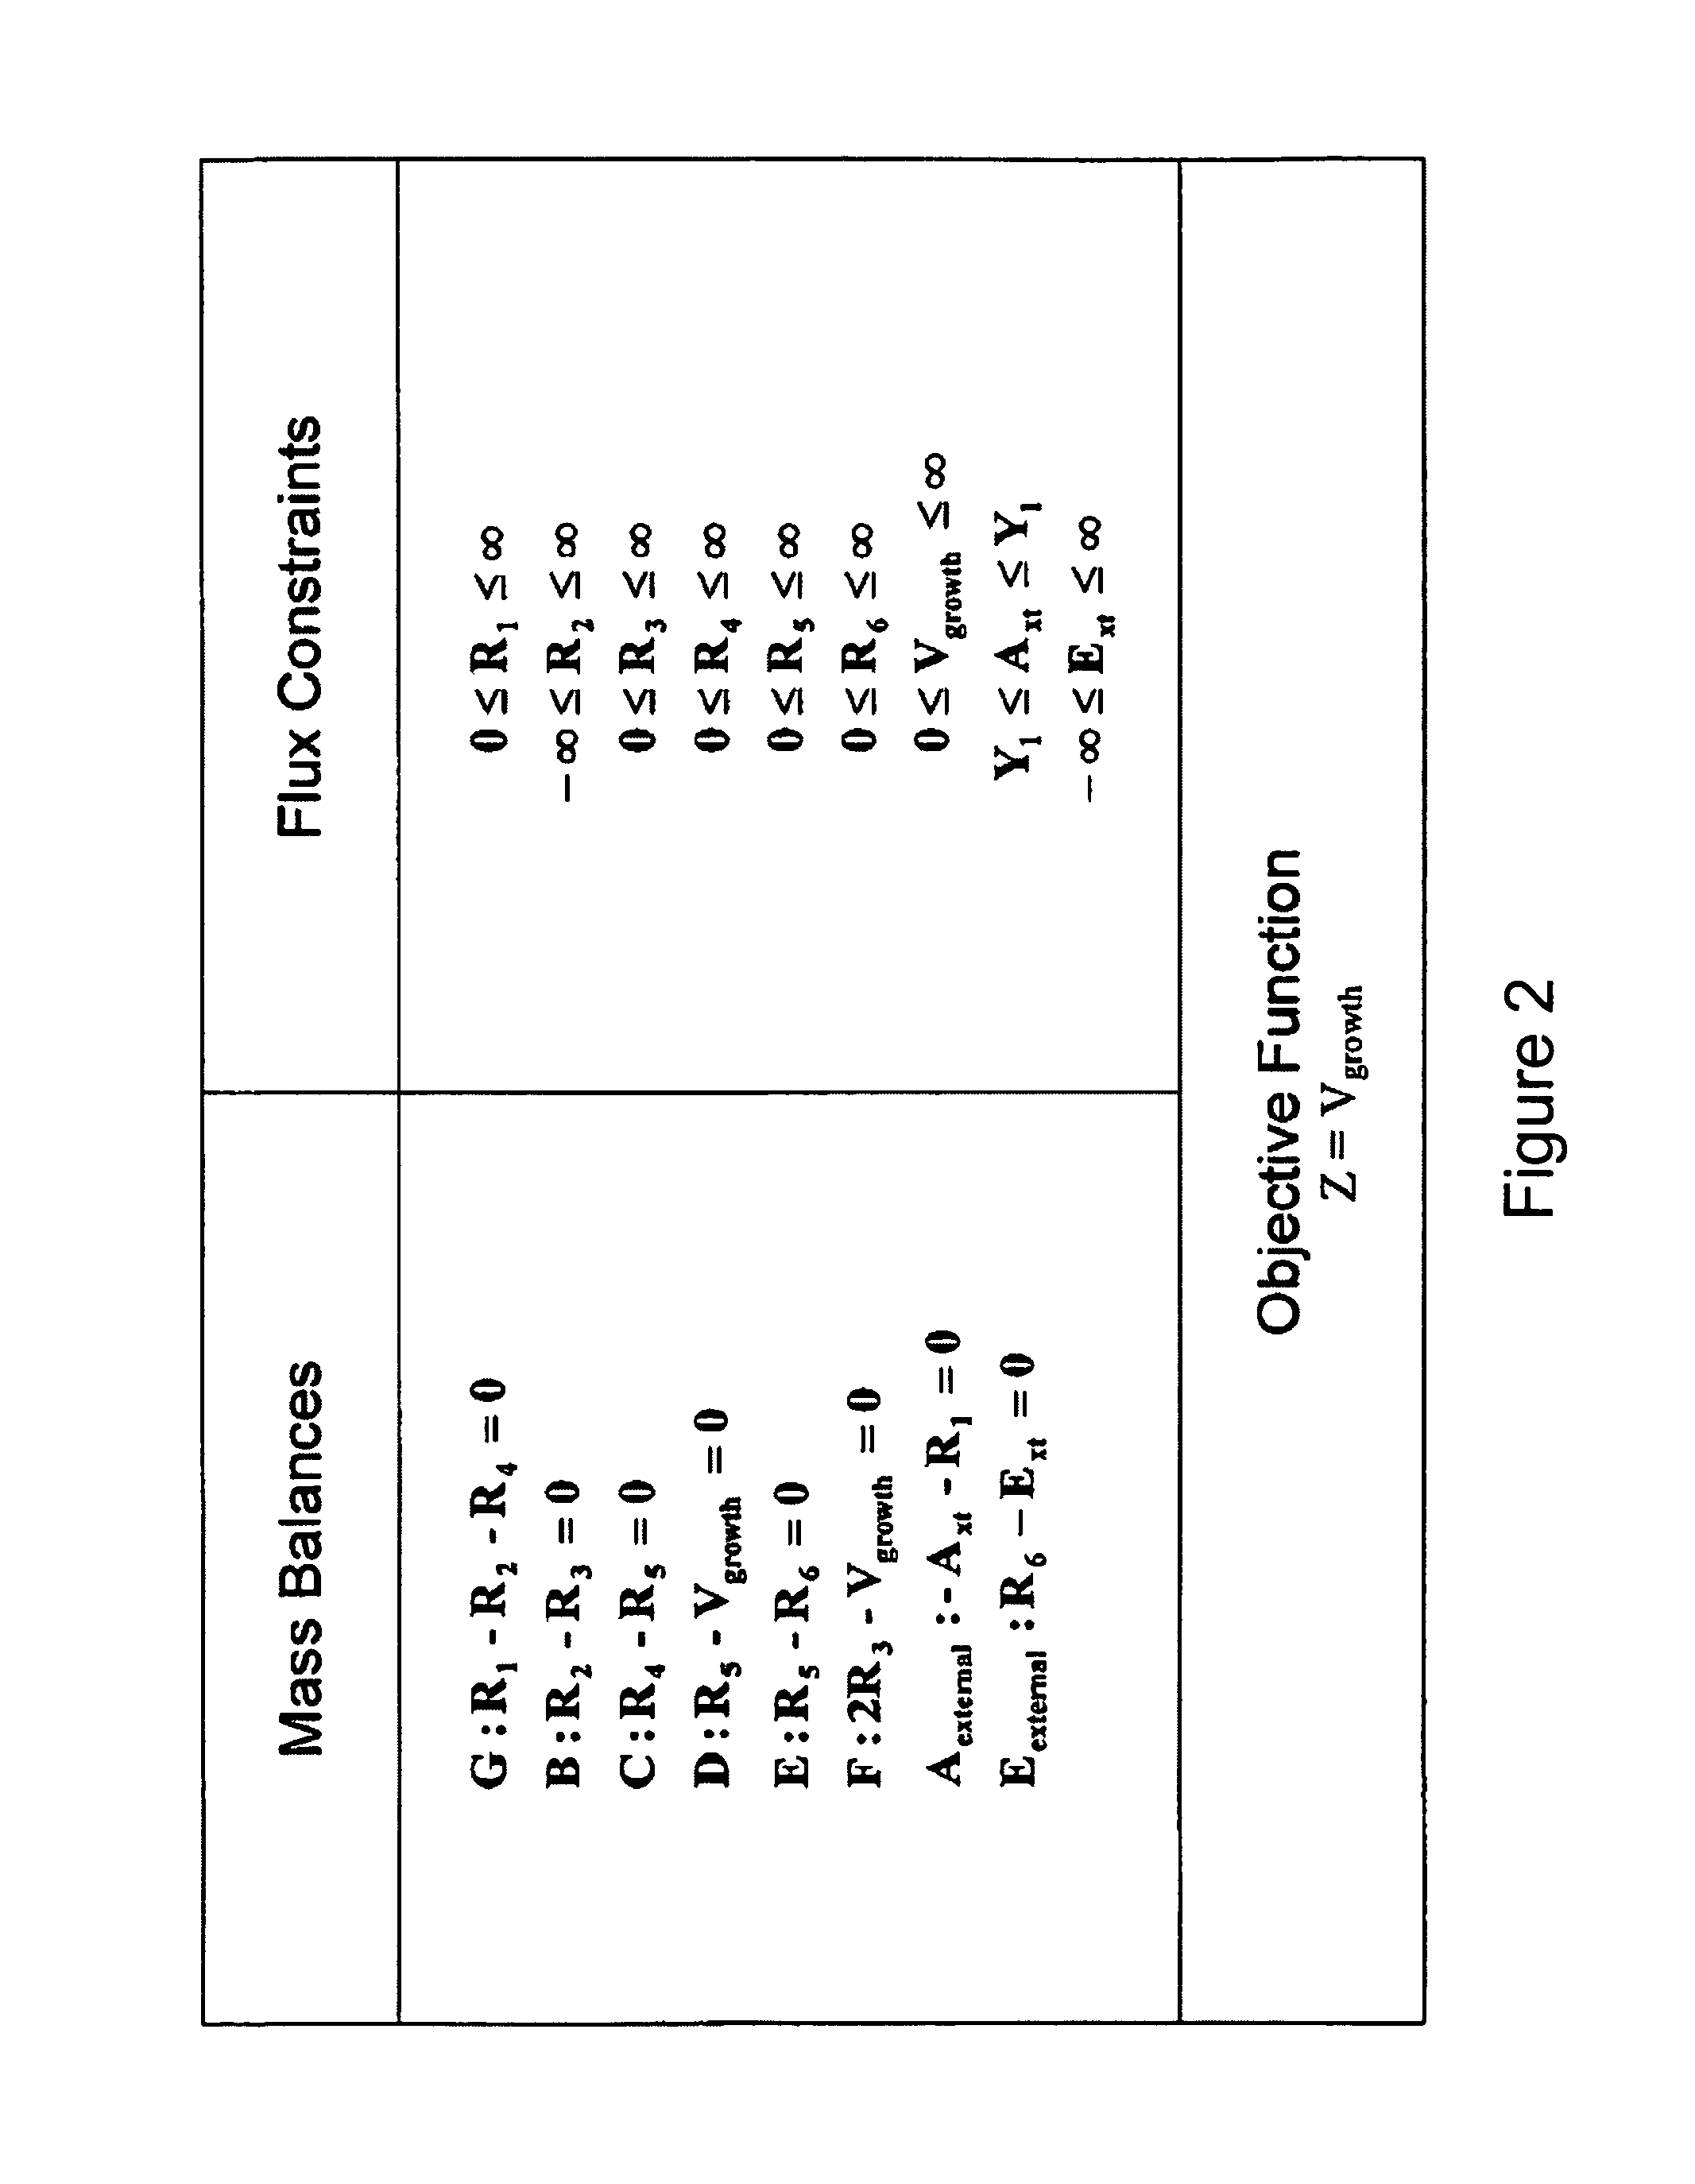 Multicellular metabolic models and methods